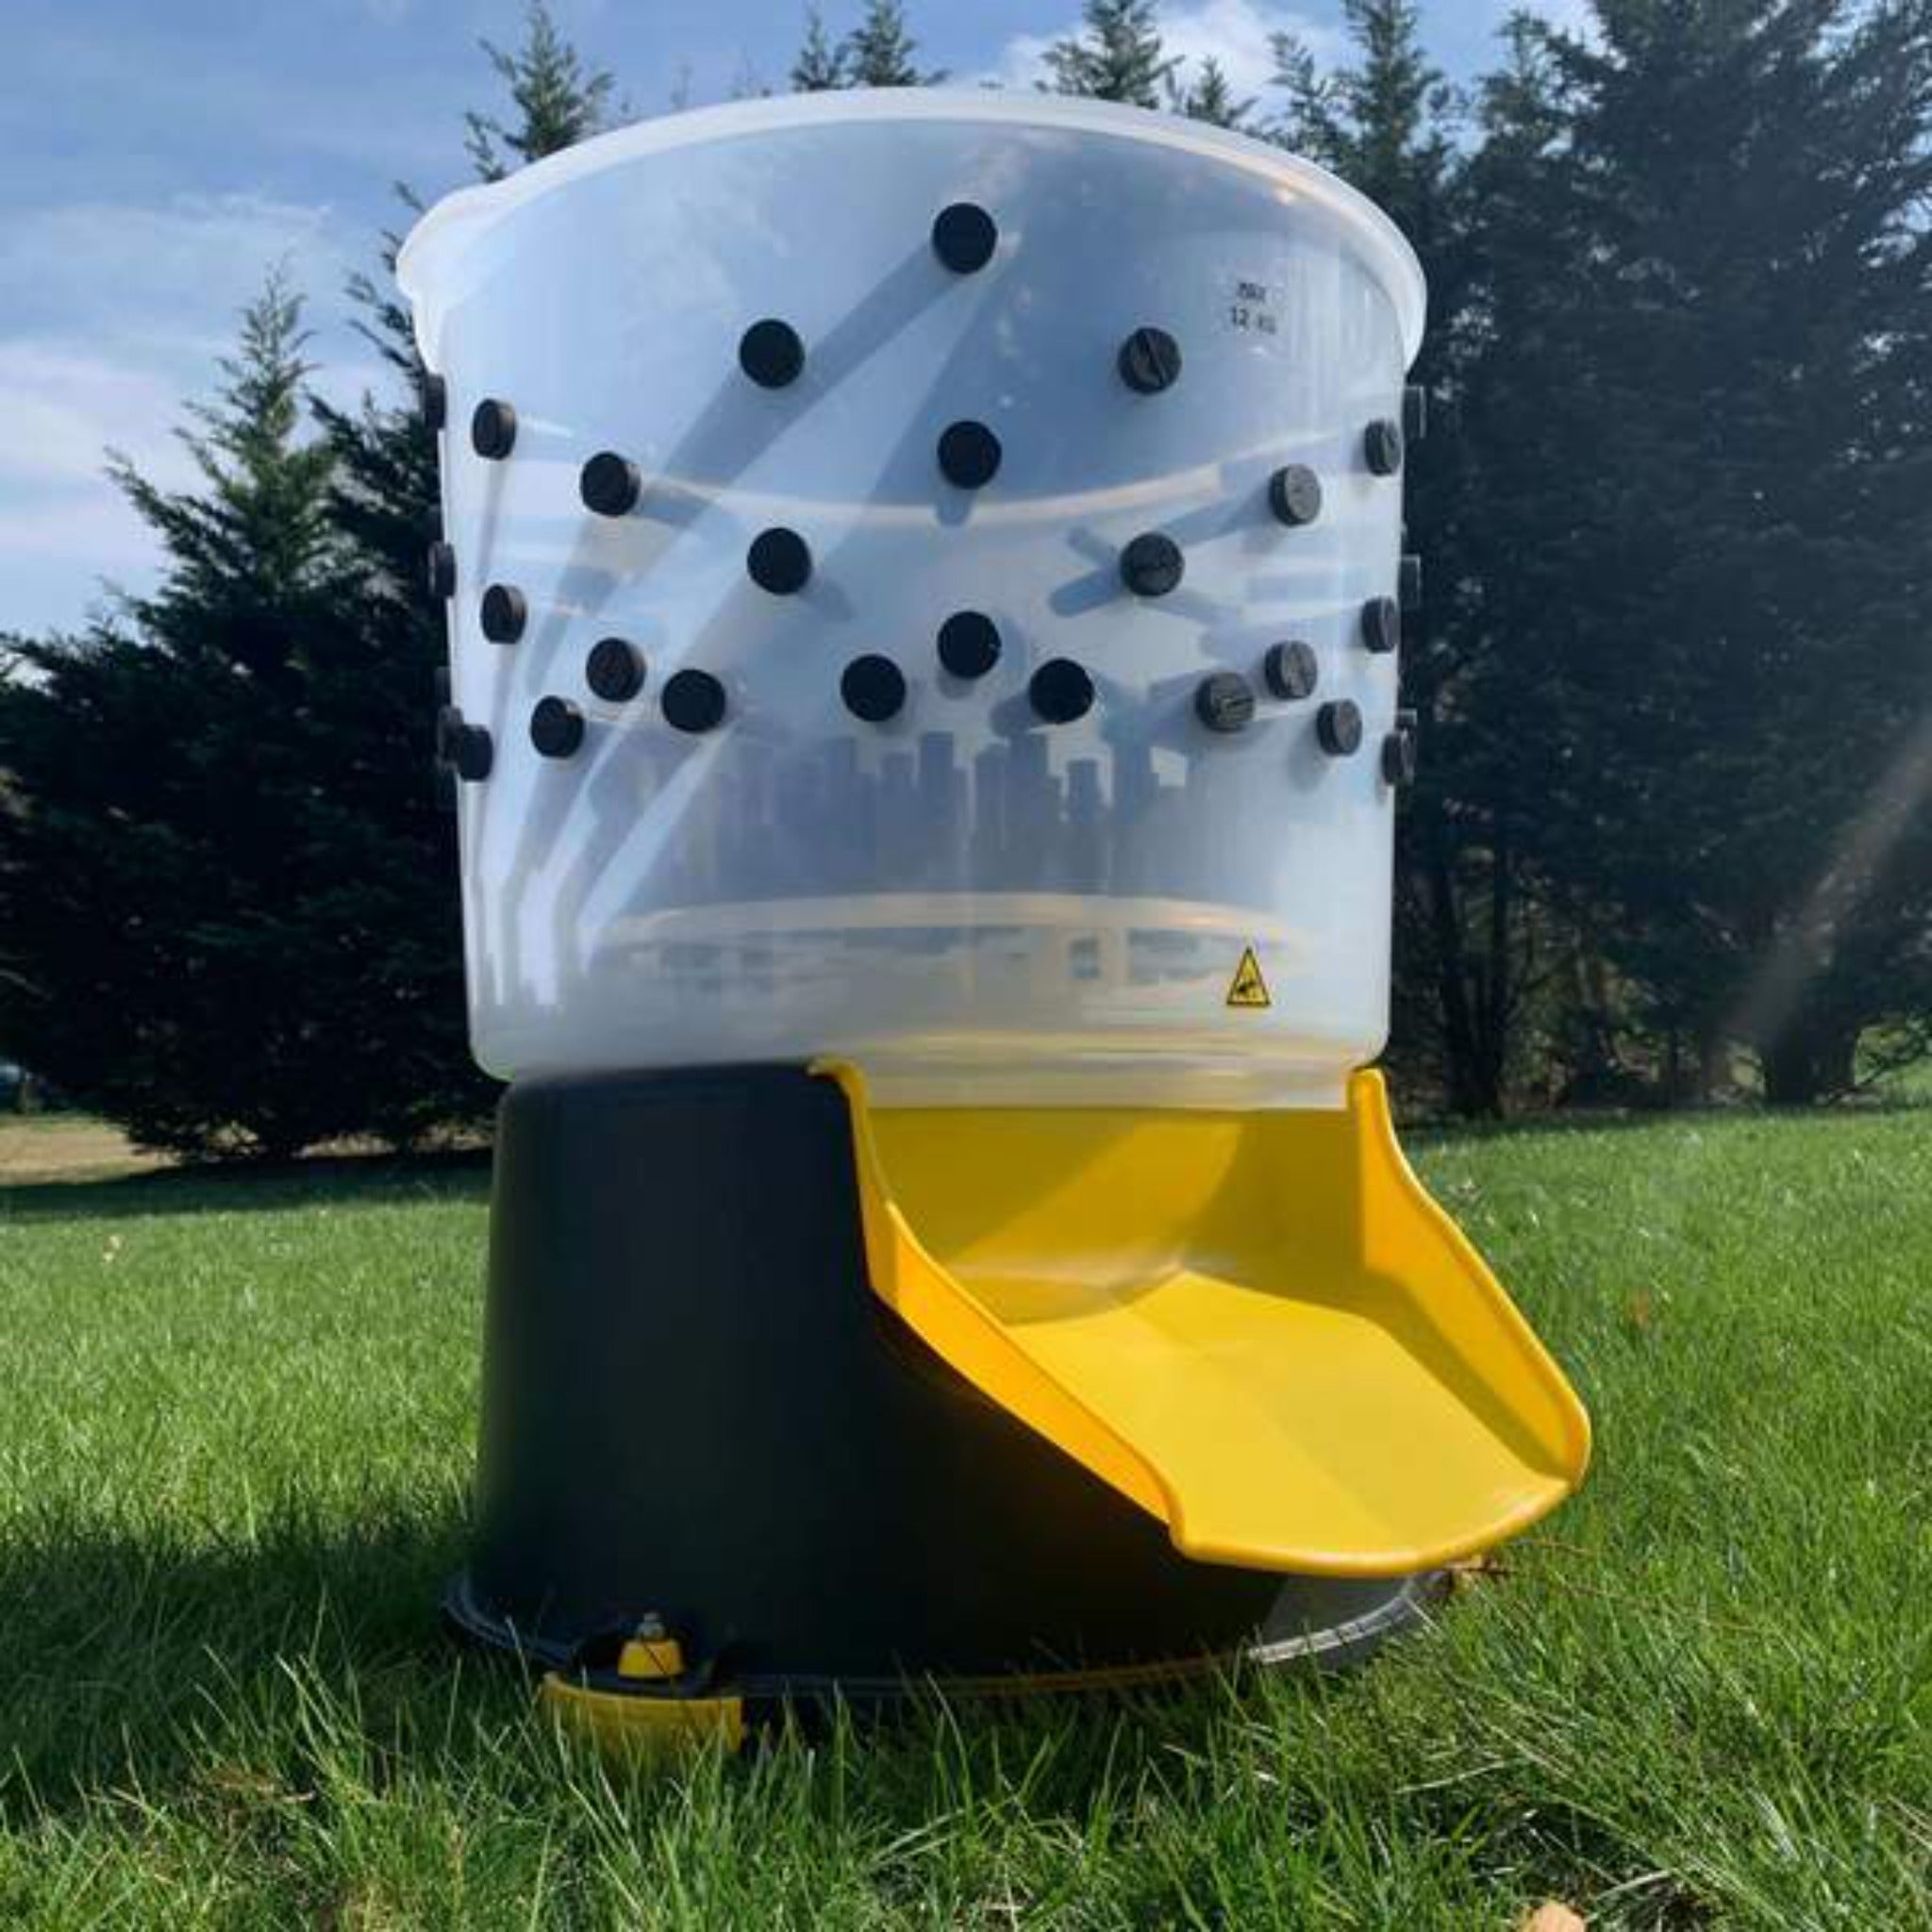 Hatching Time Cimuka. Goose feather plucker can be seen sitting on grass to show scale size of plucker. Feather chute is visible and all-natural rubber plucker fingers can be seen through rust-proof food grade plastic tub.